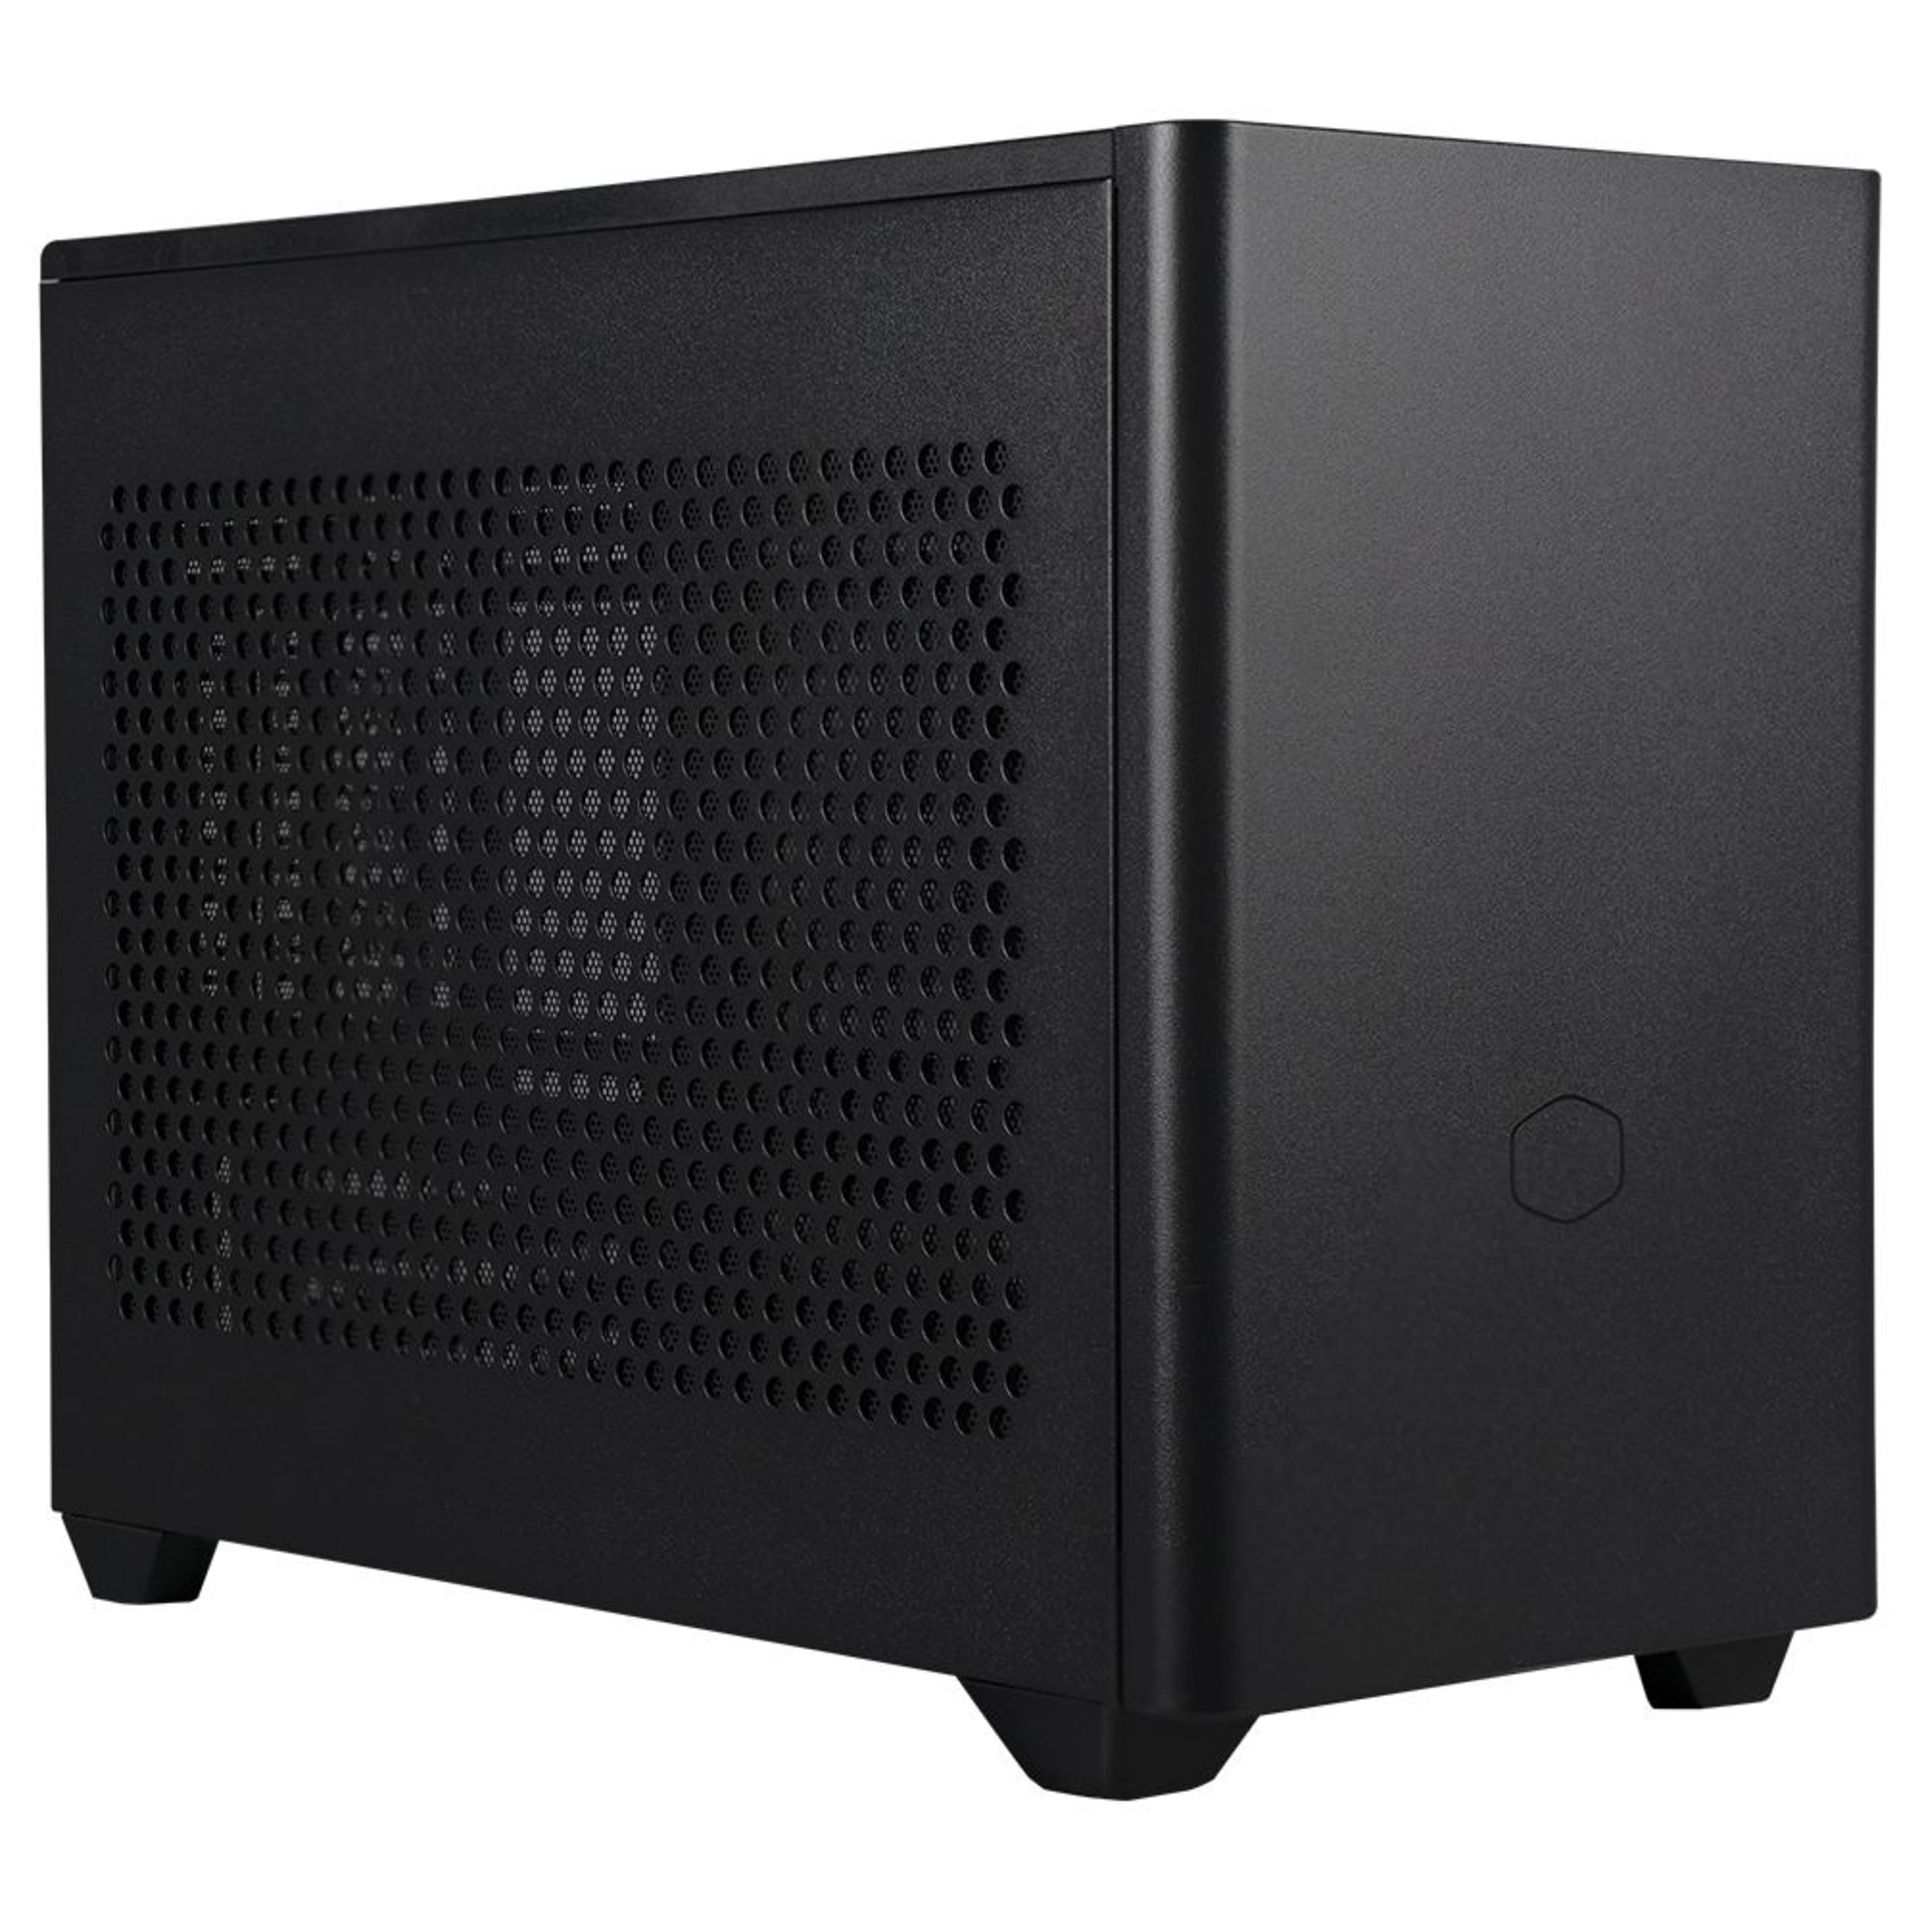 Cooler Master MasterBox NR200P Gaming Case. - EBR. RRP £300.00. The MasterBox NR200P uses features